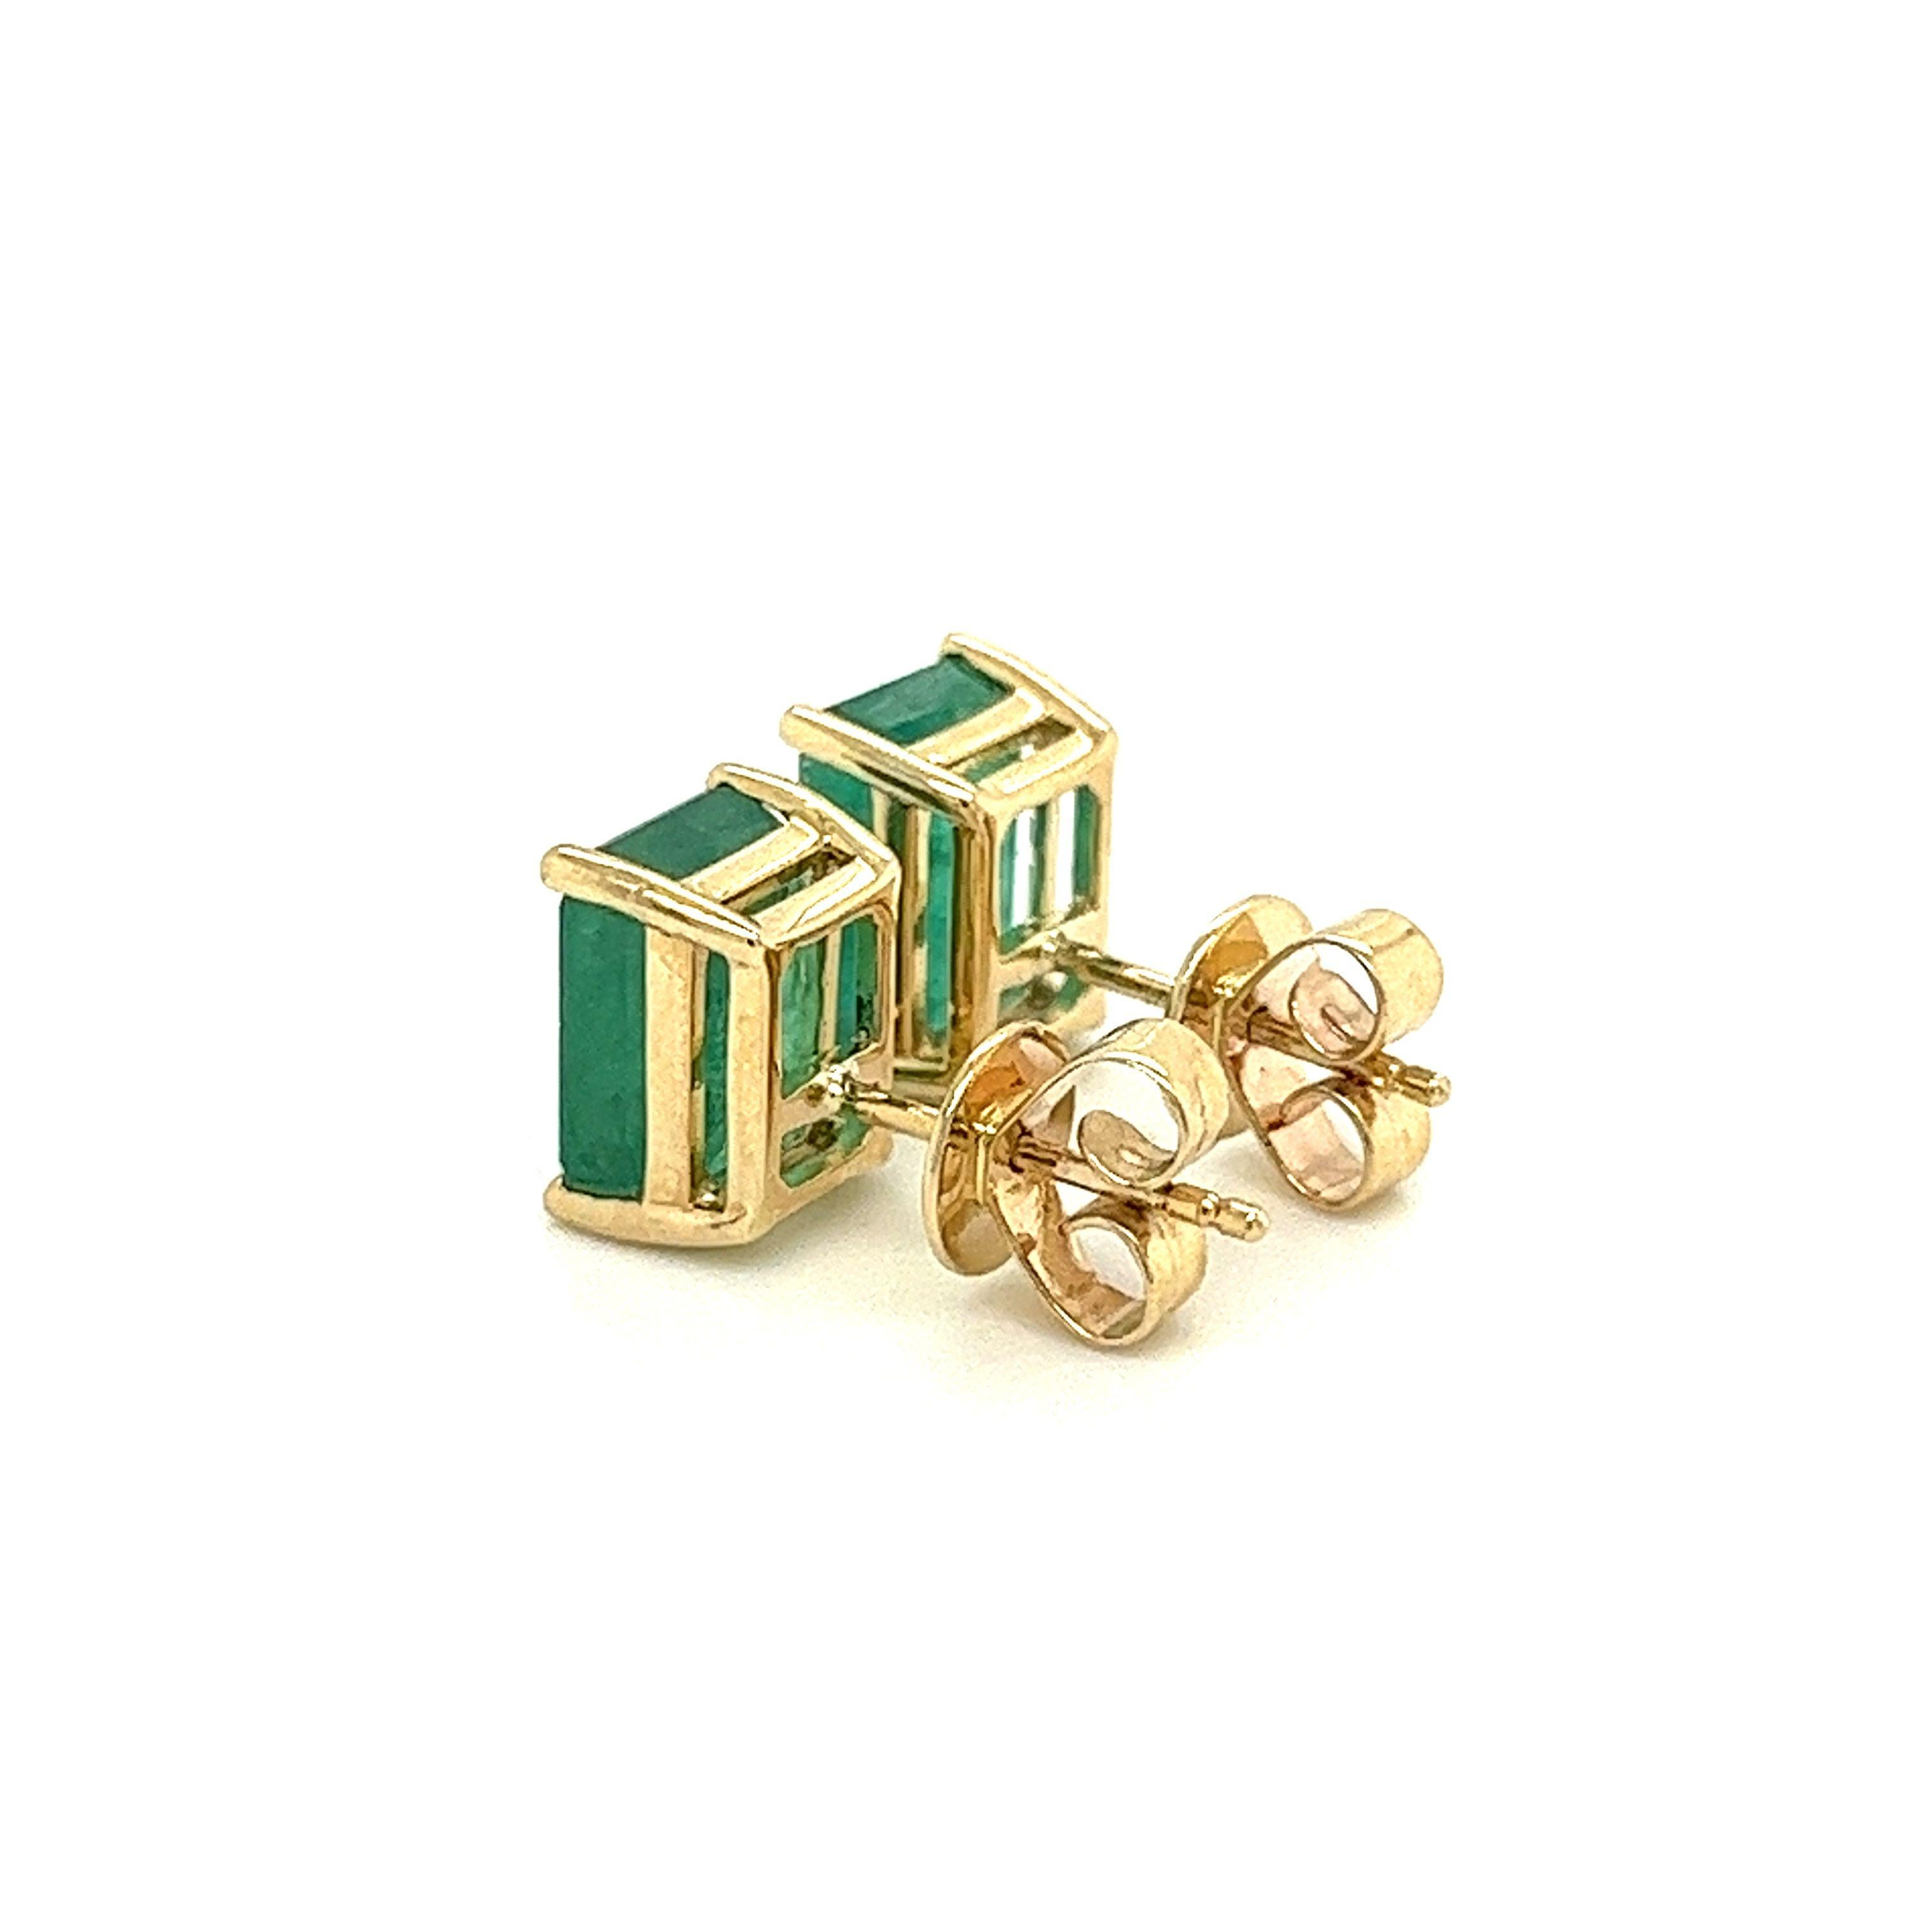 4.7 Carat Total Emerald Stud Earrings in 4-Prong 14k Solid Yellow Gold In New Condition For Sale In Miami, FL